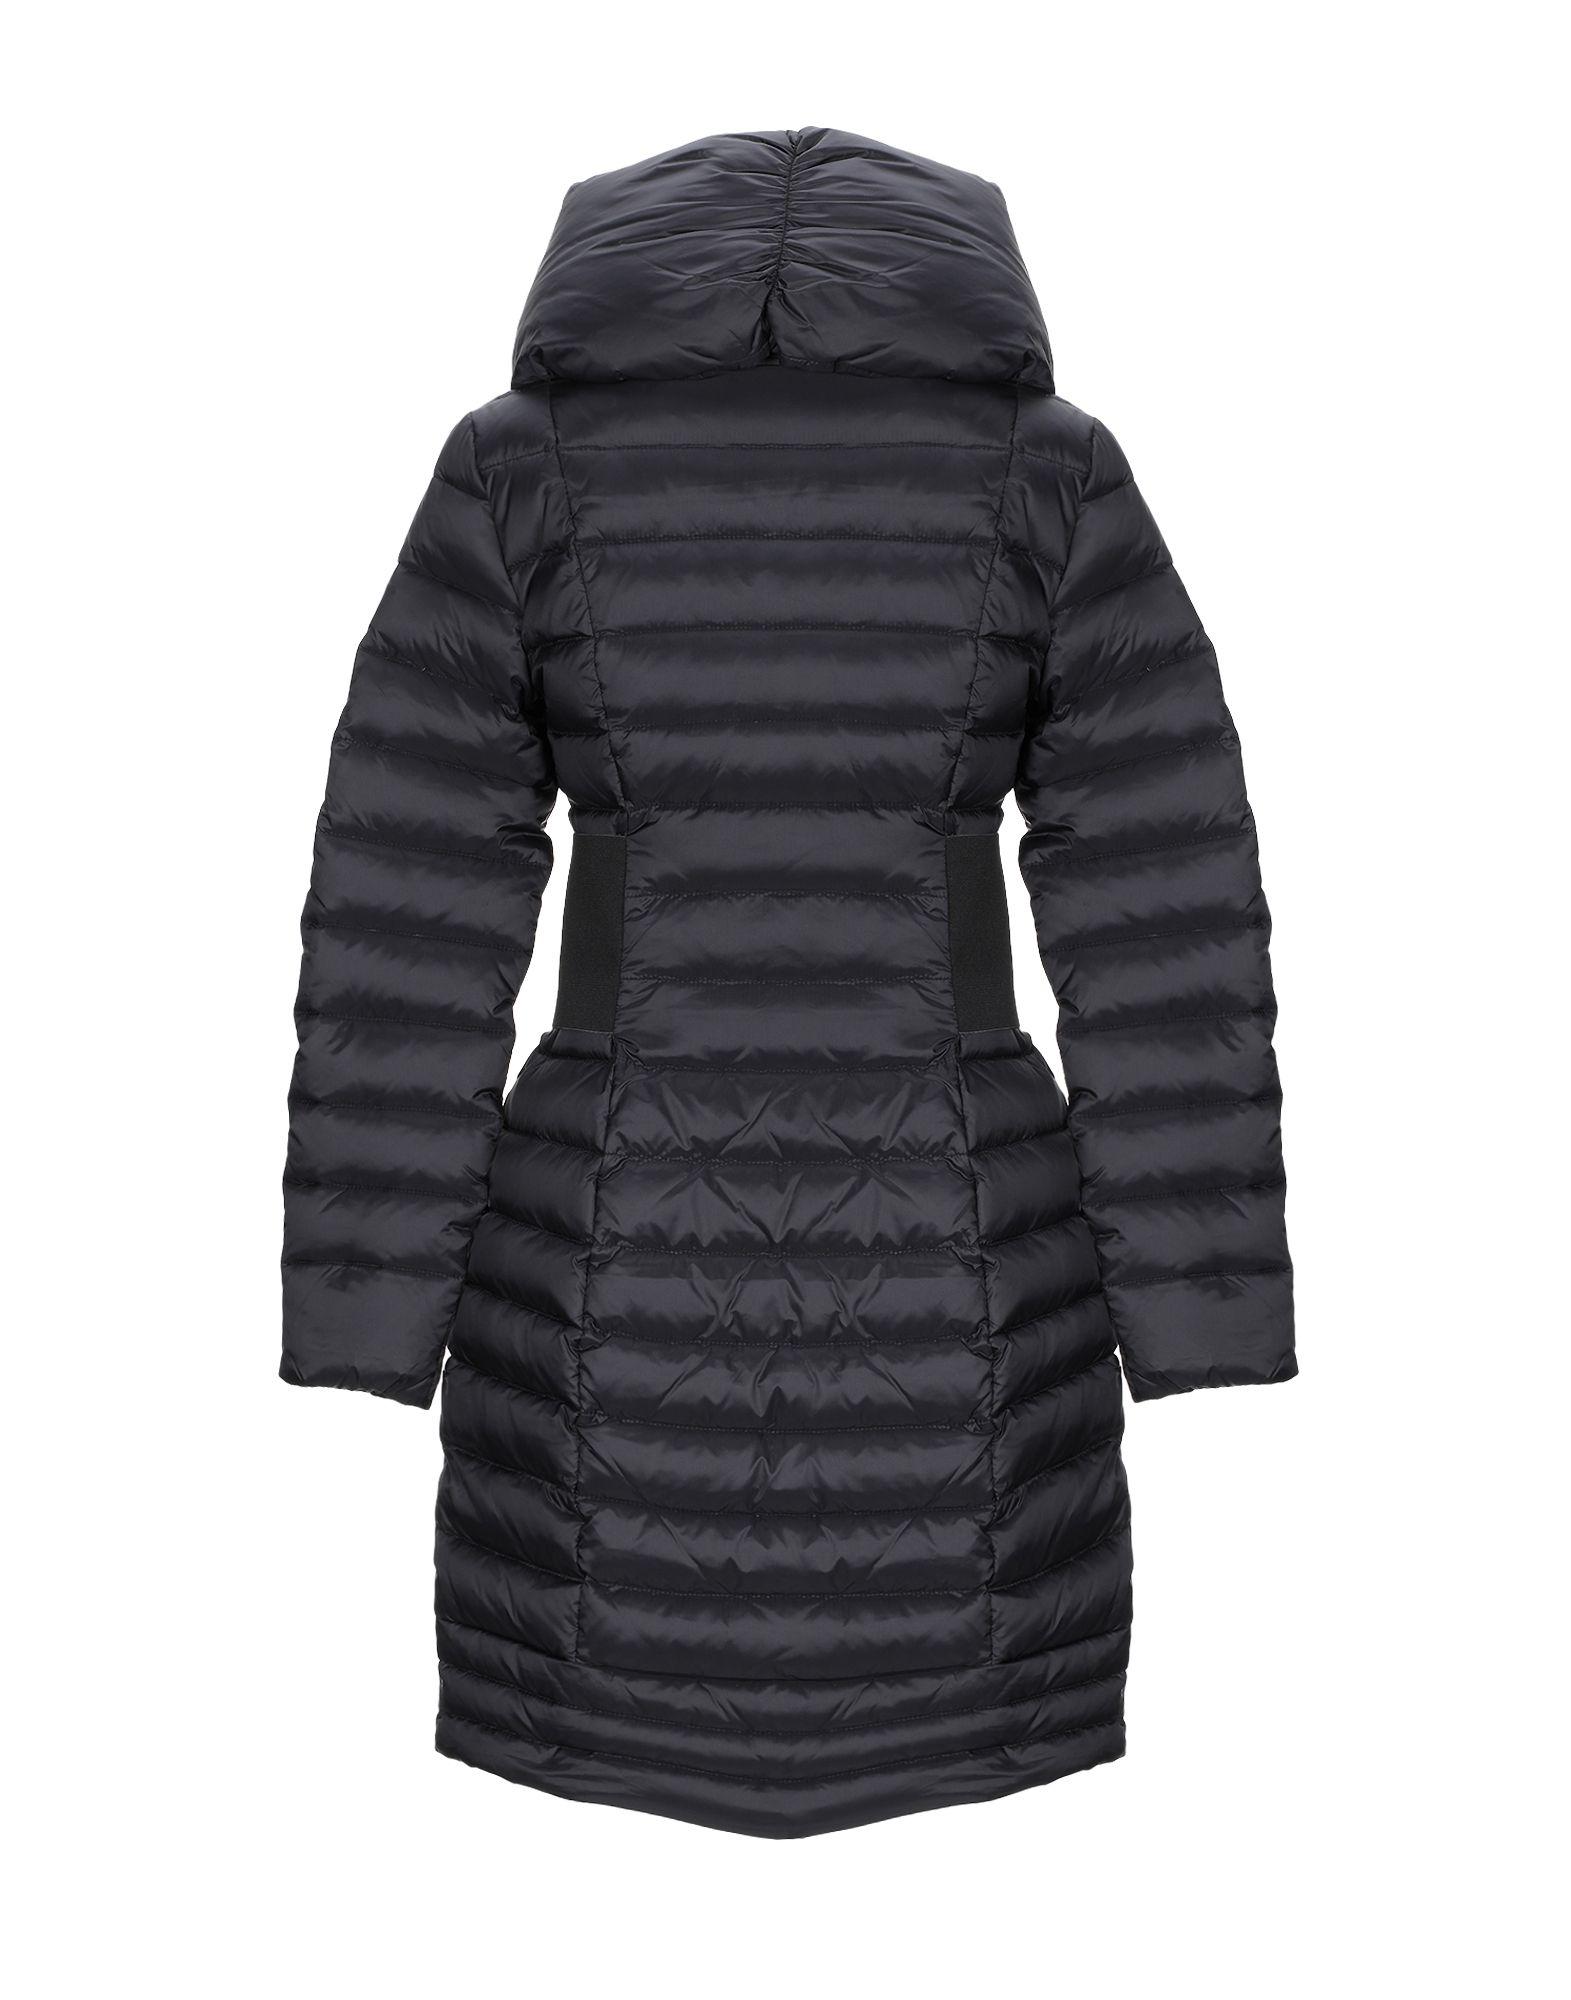 Guess Synthetic Down Jacket in Black - Lyst